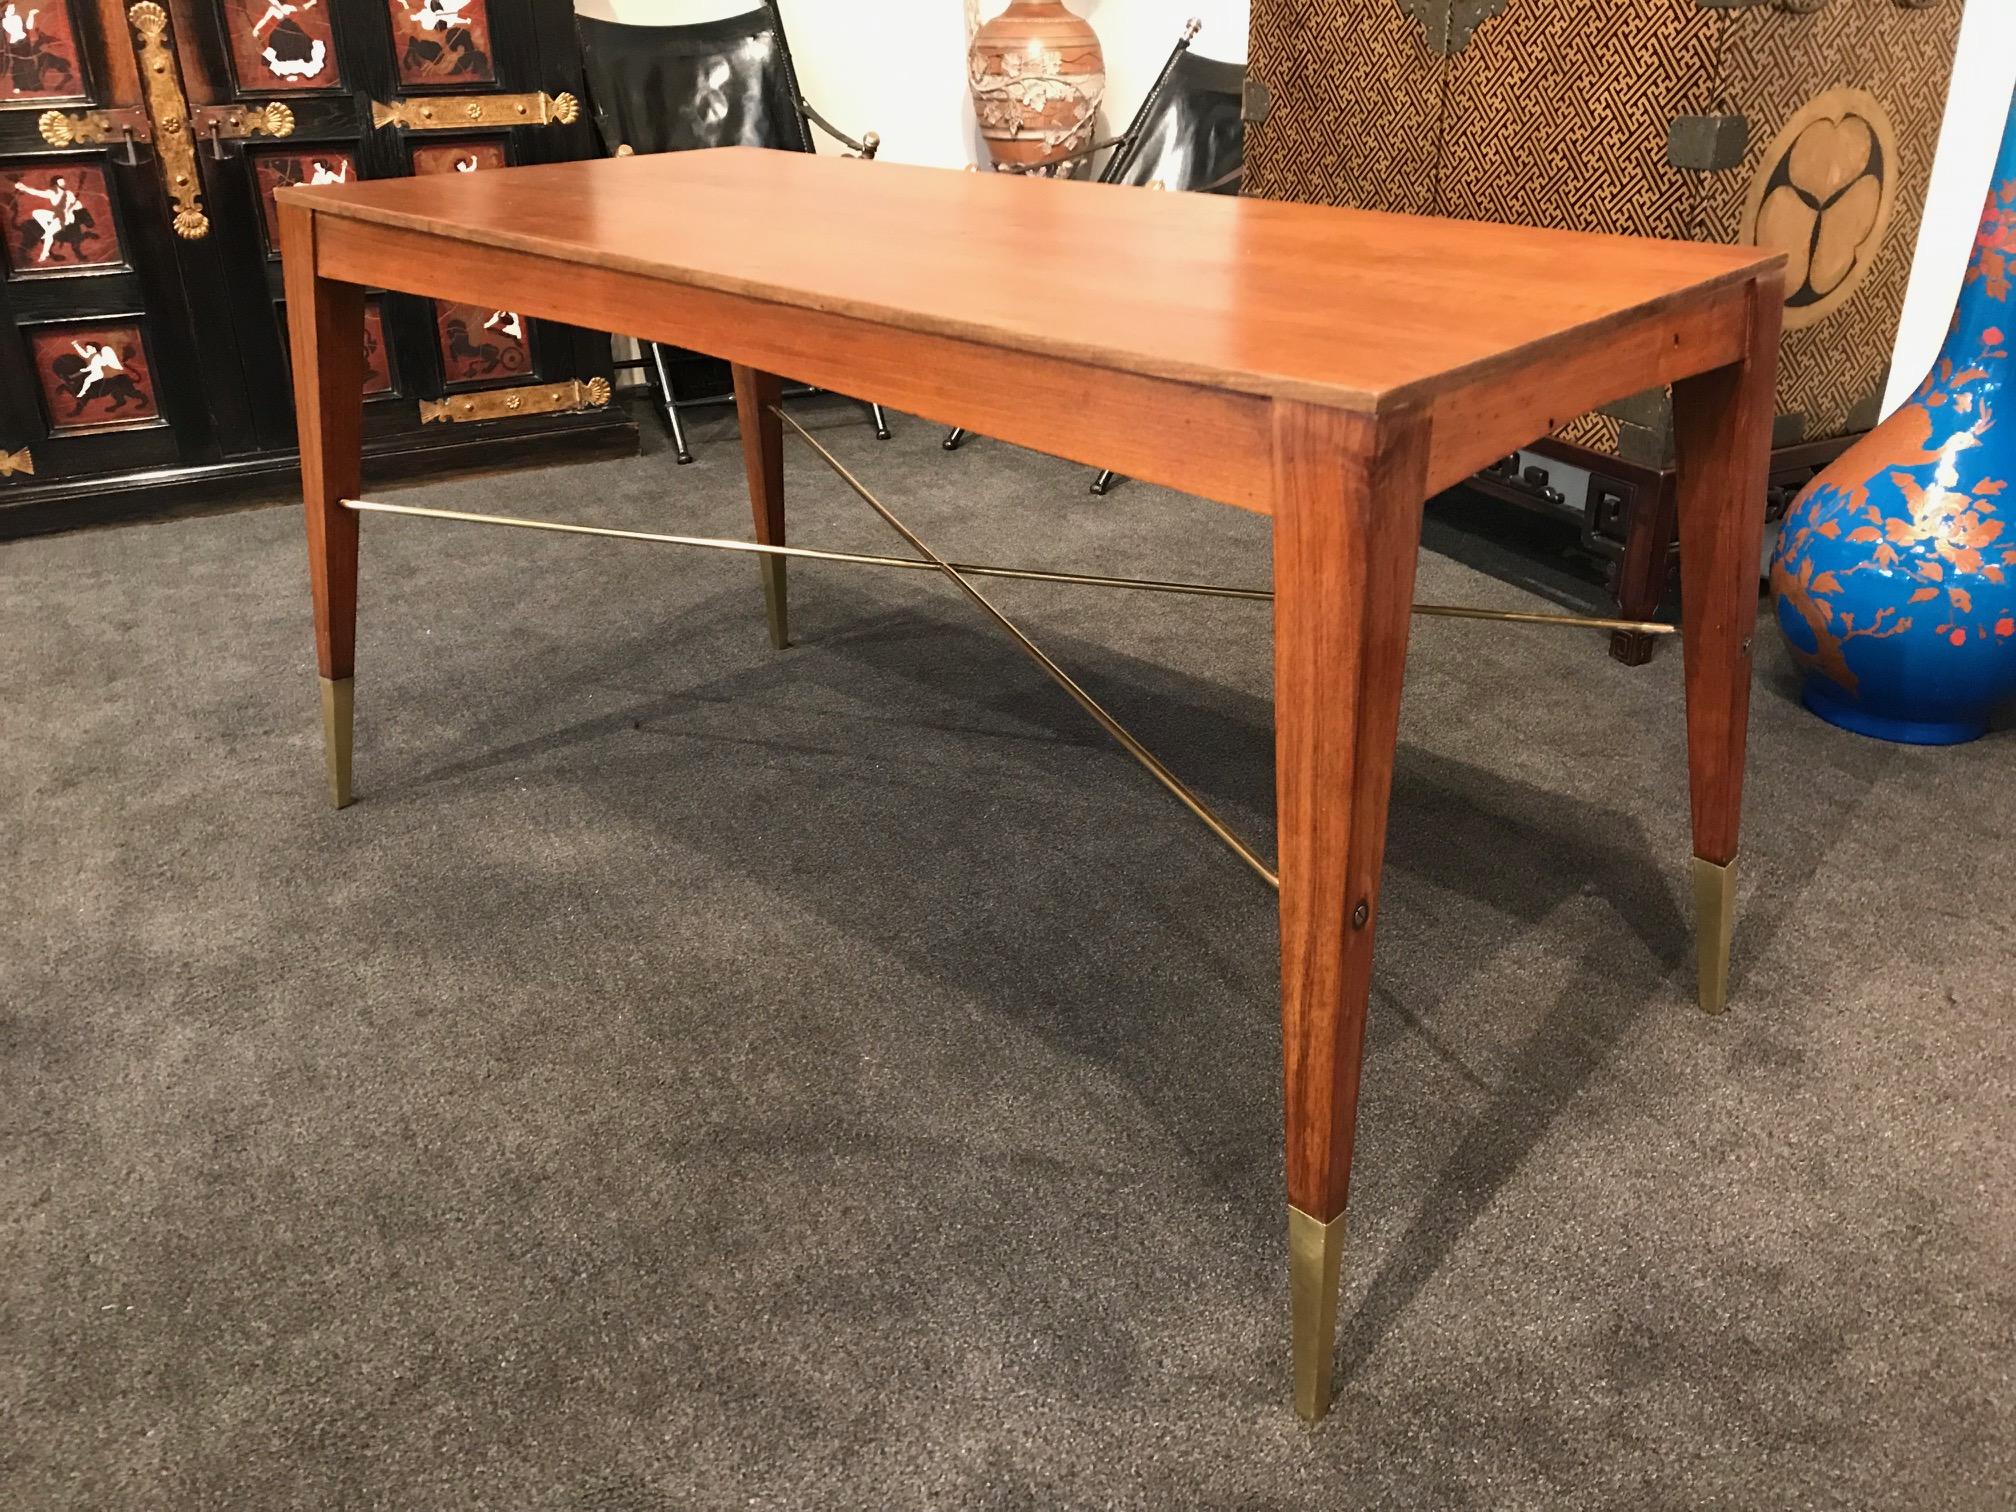 Italian Modernist Style Walnut Table Desk In Good Condition For Sale In Montreal, QC